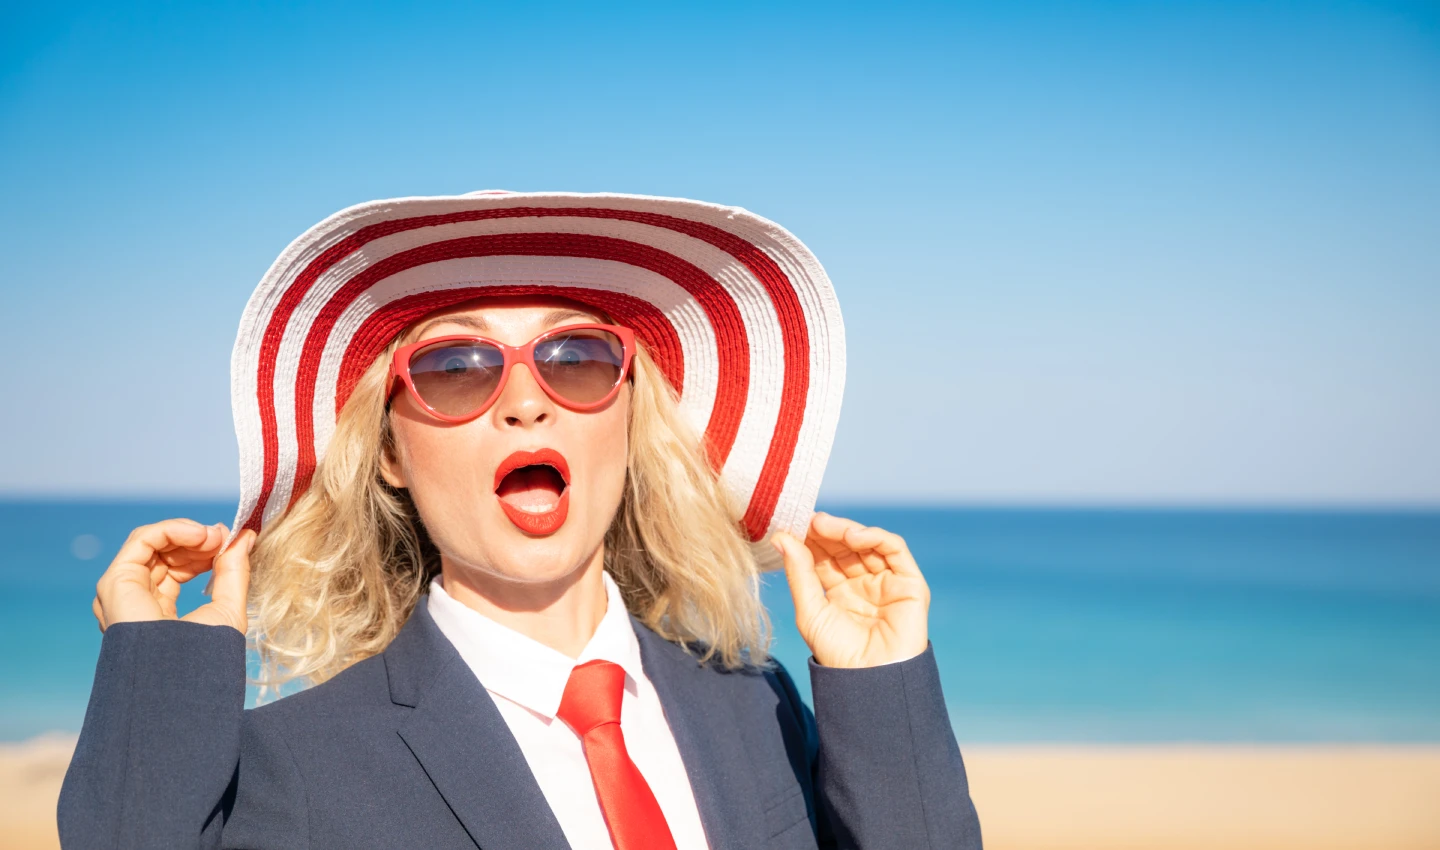 Woman with sunglasses standing on a beach, looking at the sun, with a glowing complexion achieved through proper skincare routine.